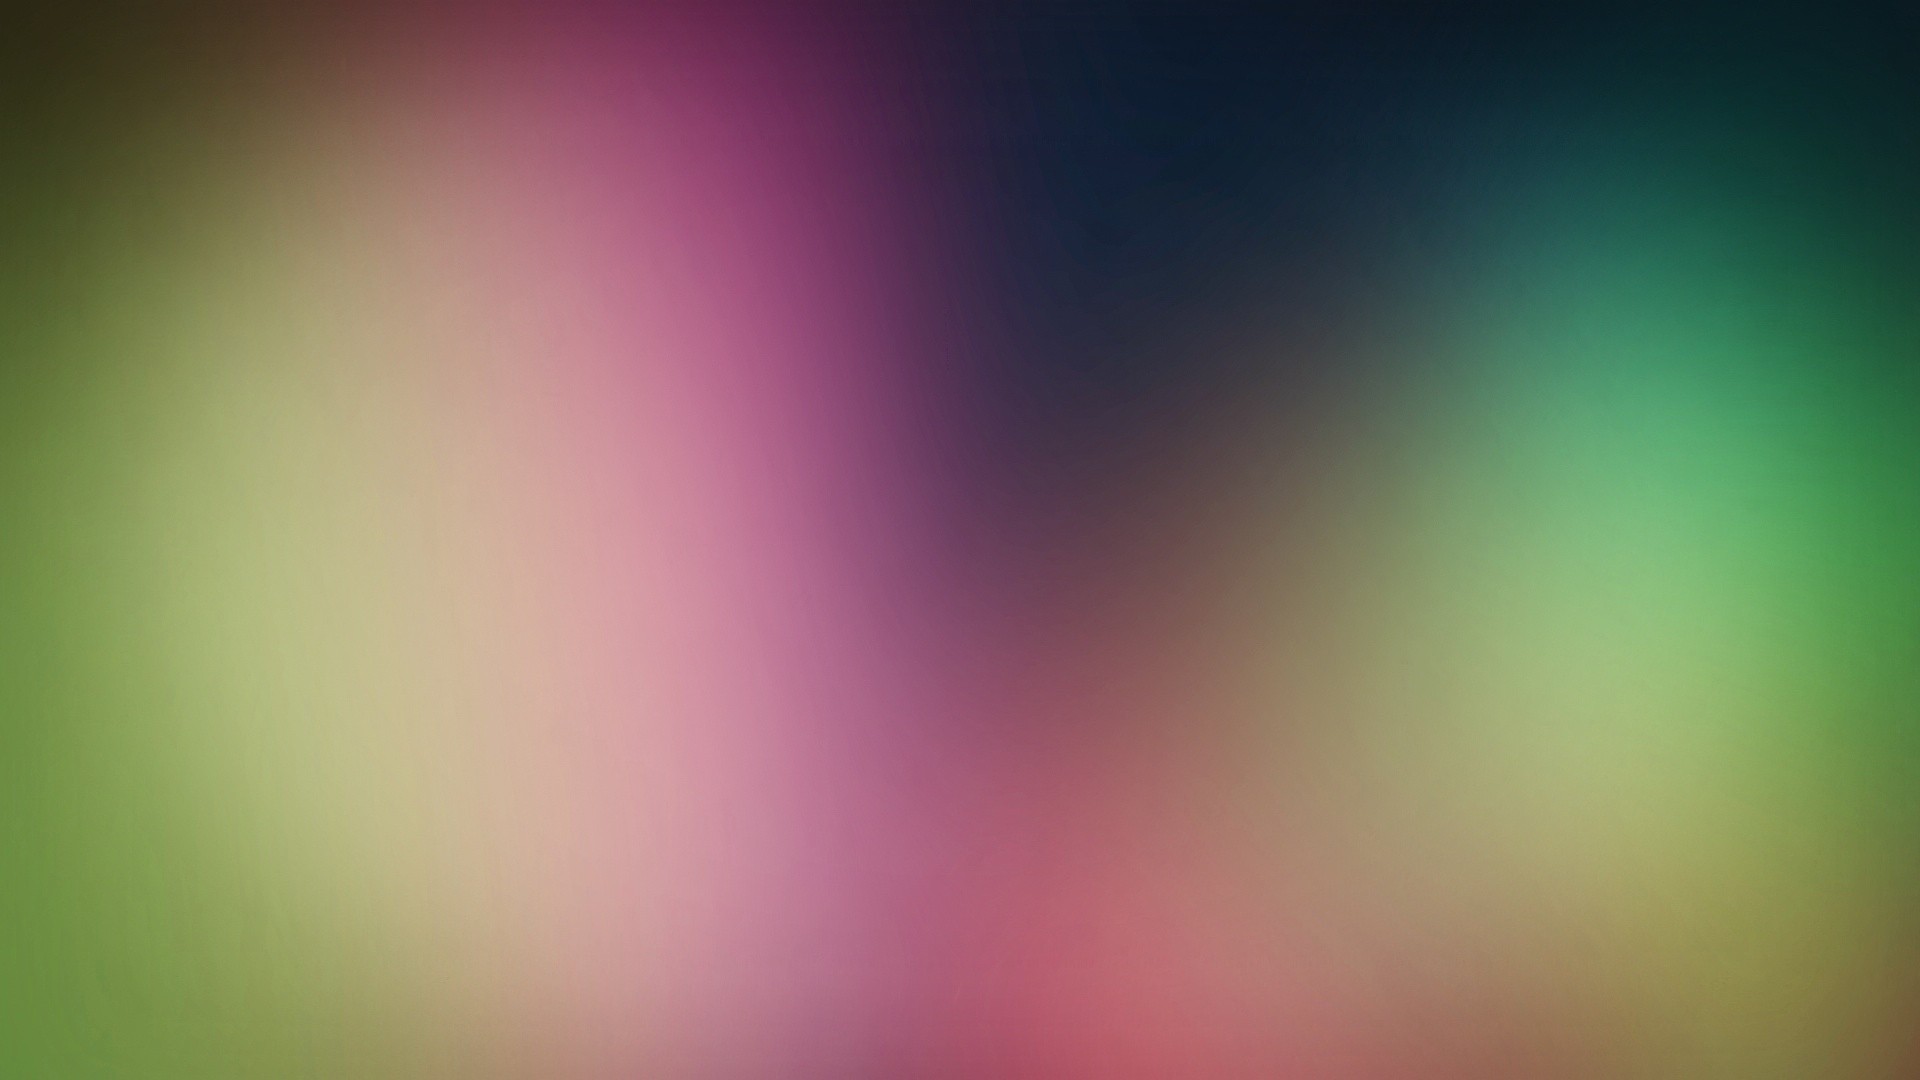 Wallpaper, sunlight, colorful, green, gradient, blurred, circle, atmosphere, lens flare, Aurora, light, color, rainbow, line, computer wallpaper, close up, macro photography 1920x1080